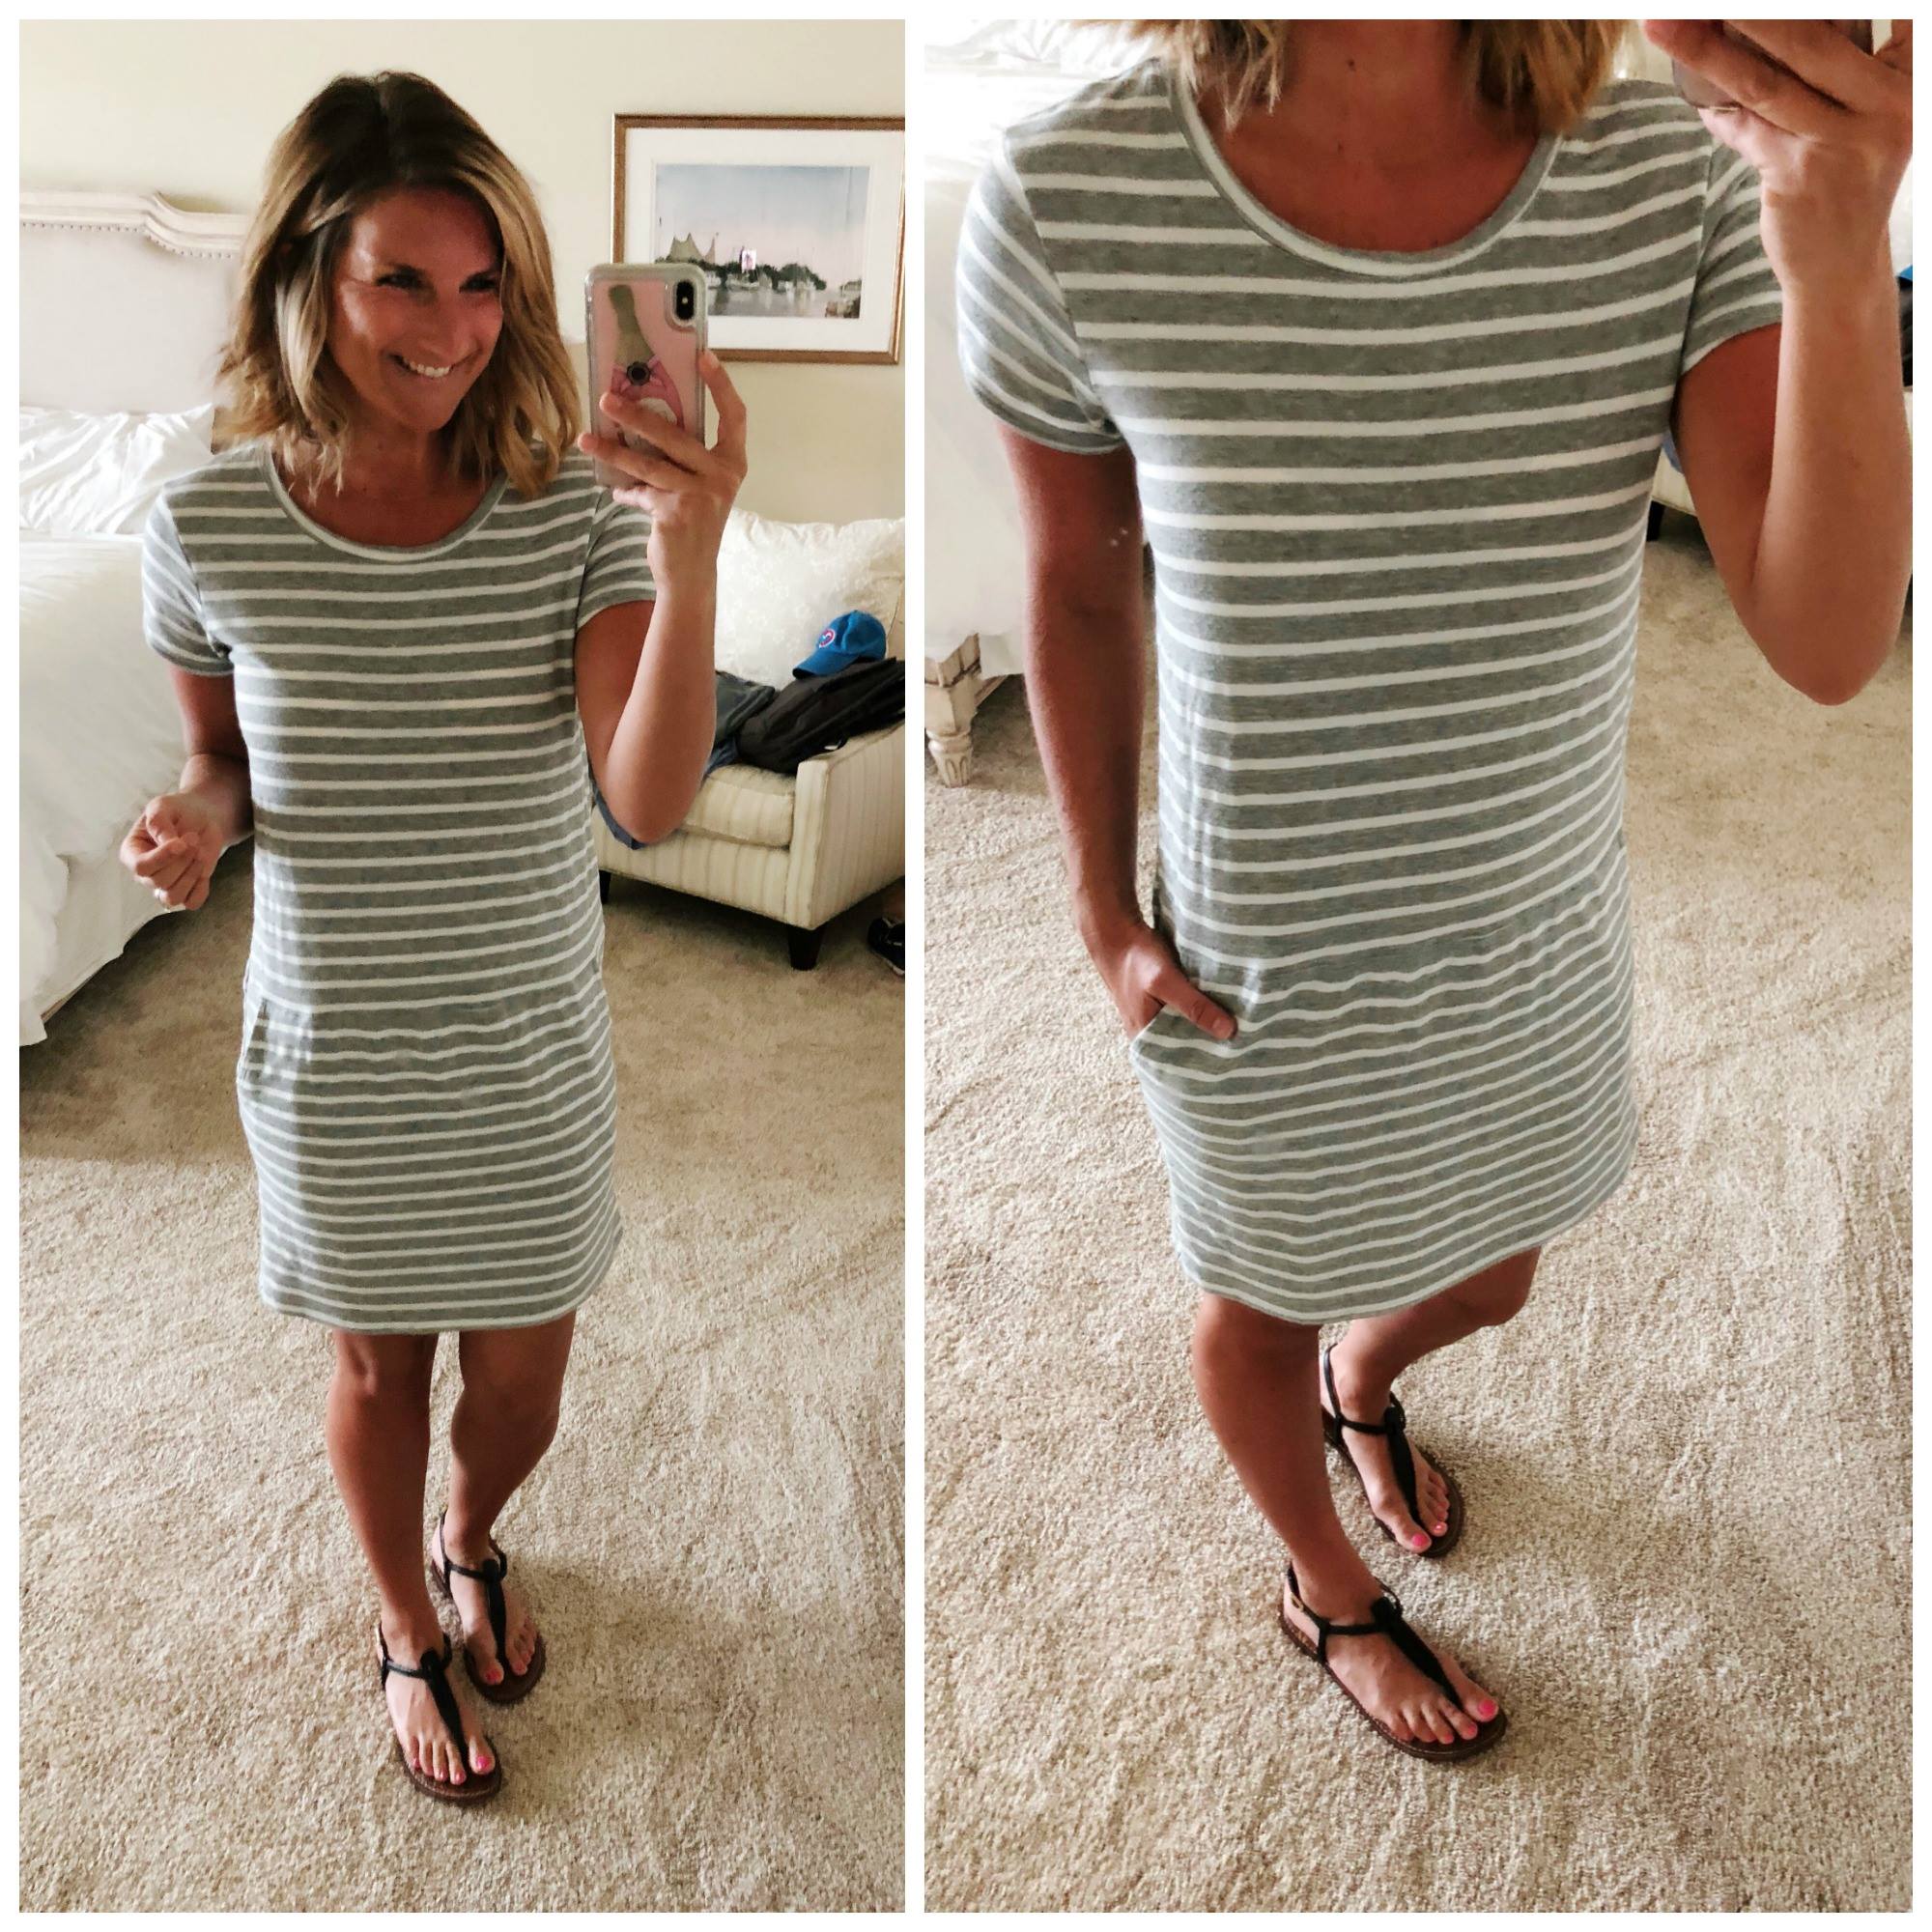 Perfect Summer Dress // What to Wear in the Summer // Striped Dress + Sandals // Summer Fashion